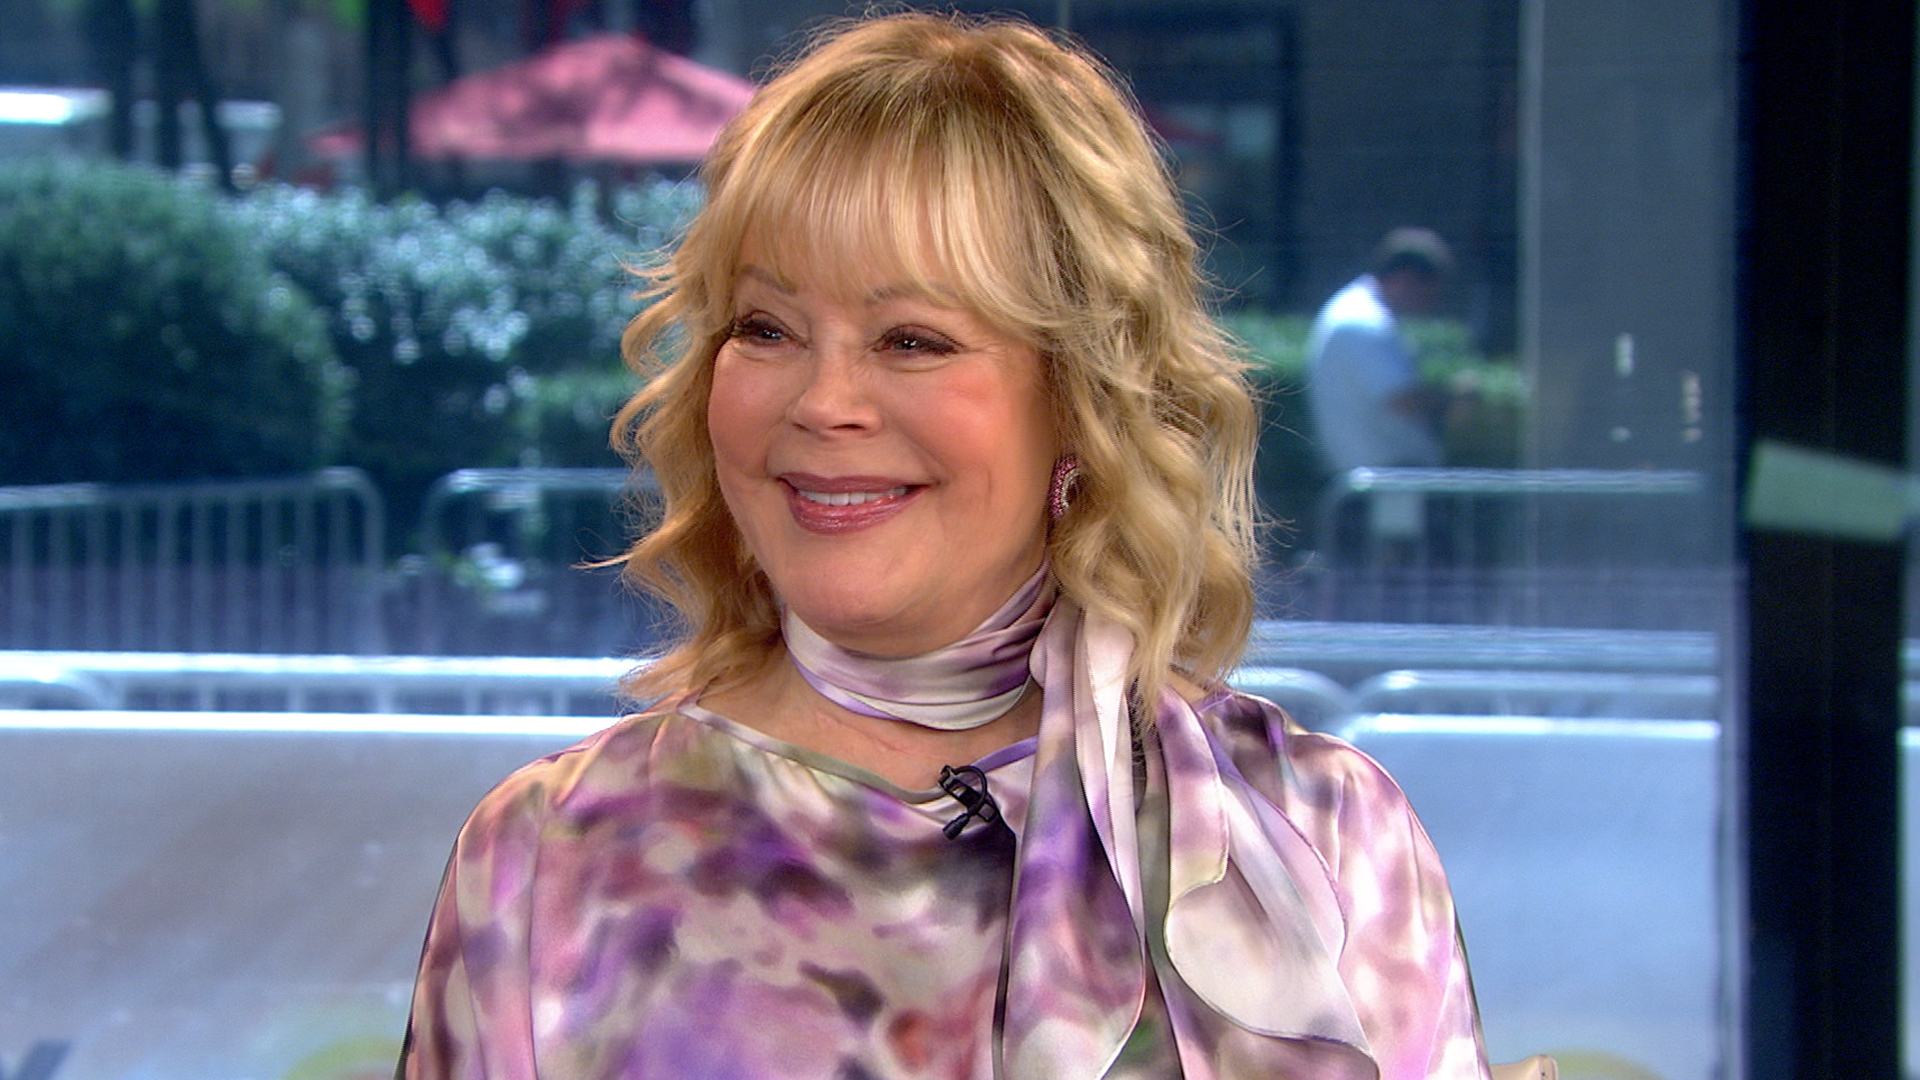 Candy Spelling wearing a matching purple scarf and top